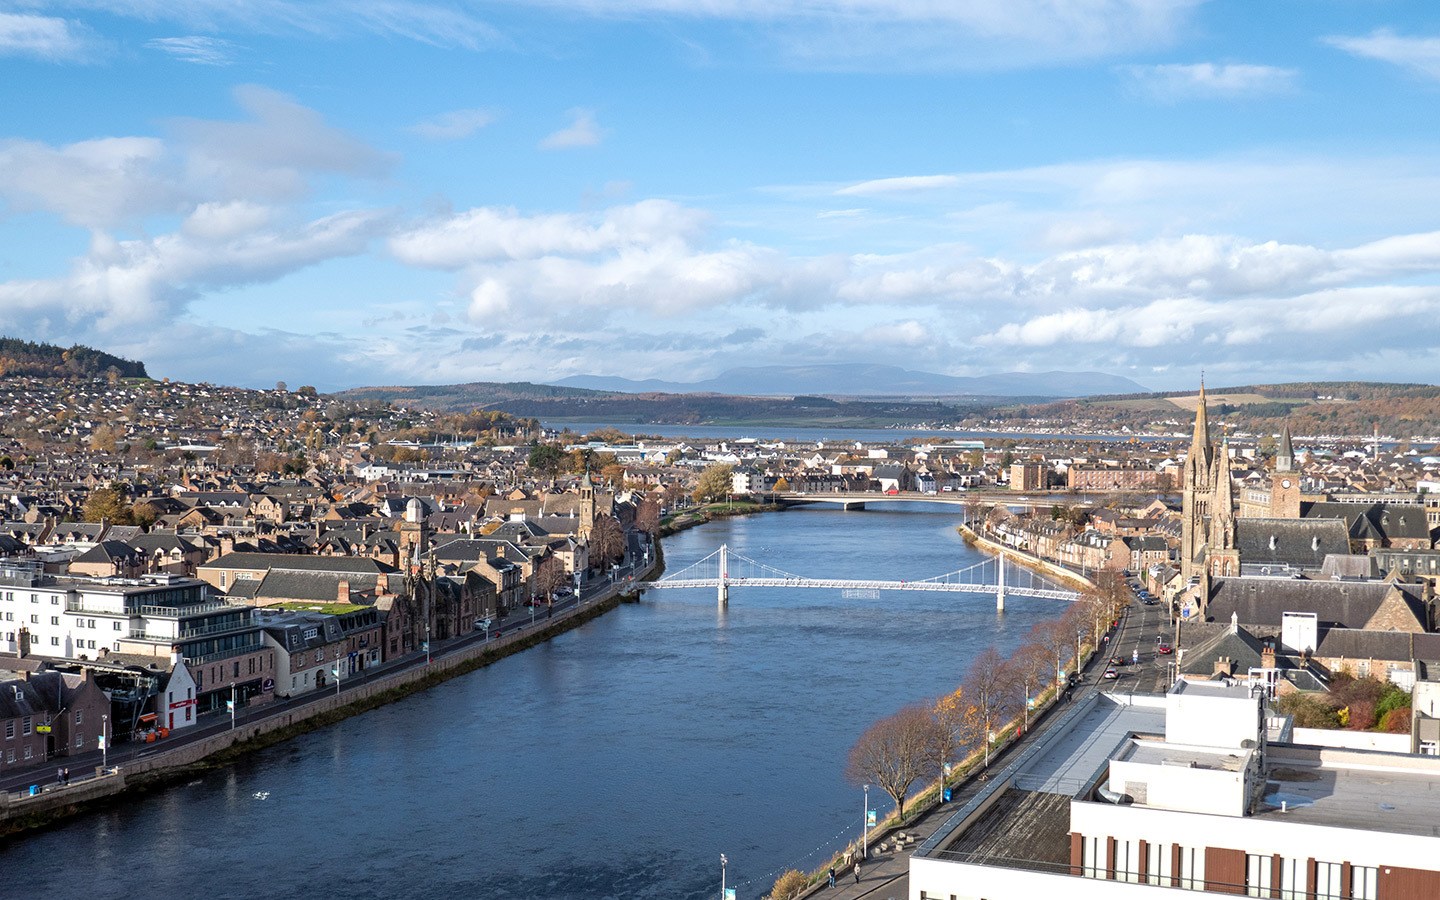 Views from Inverness Castle in Inverness, Scotland